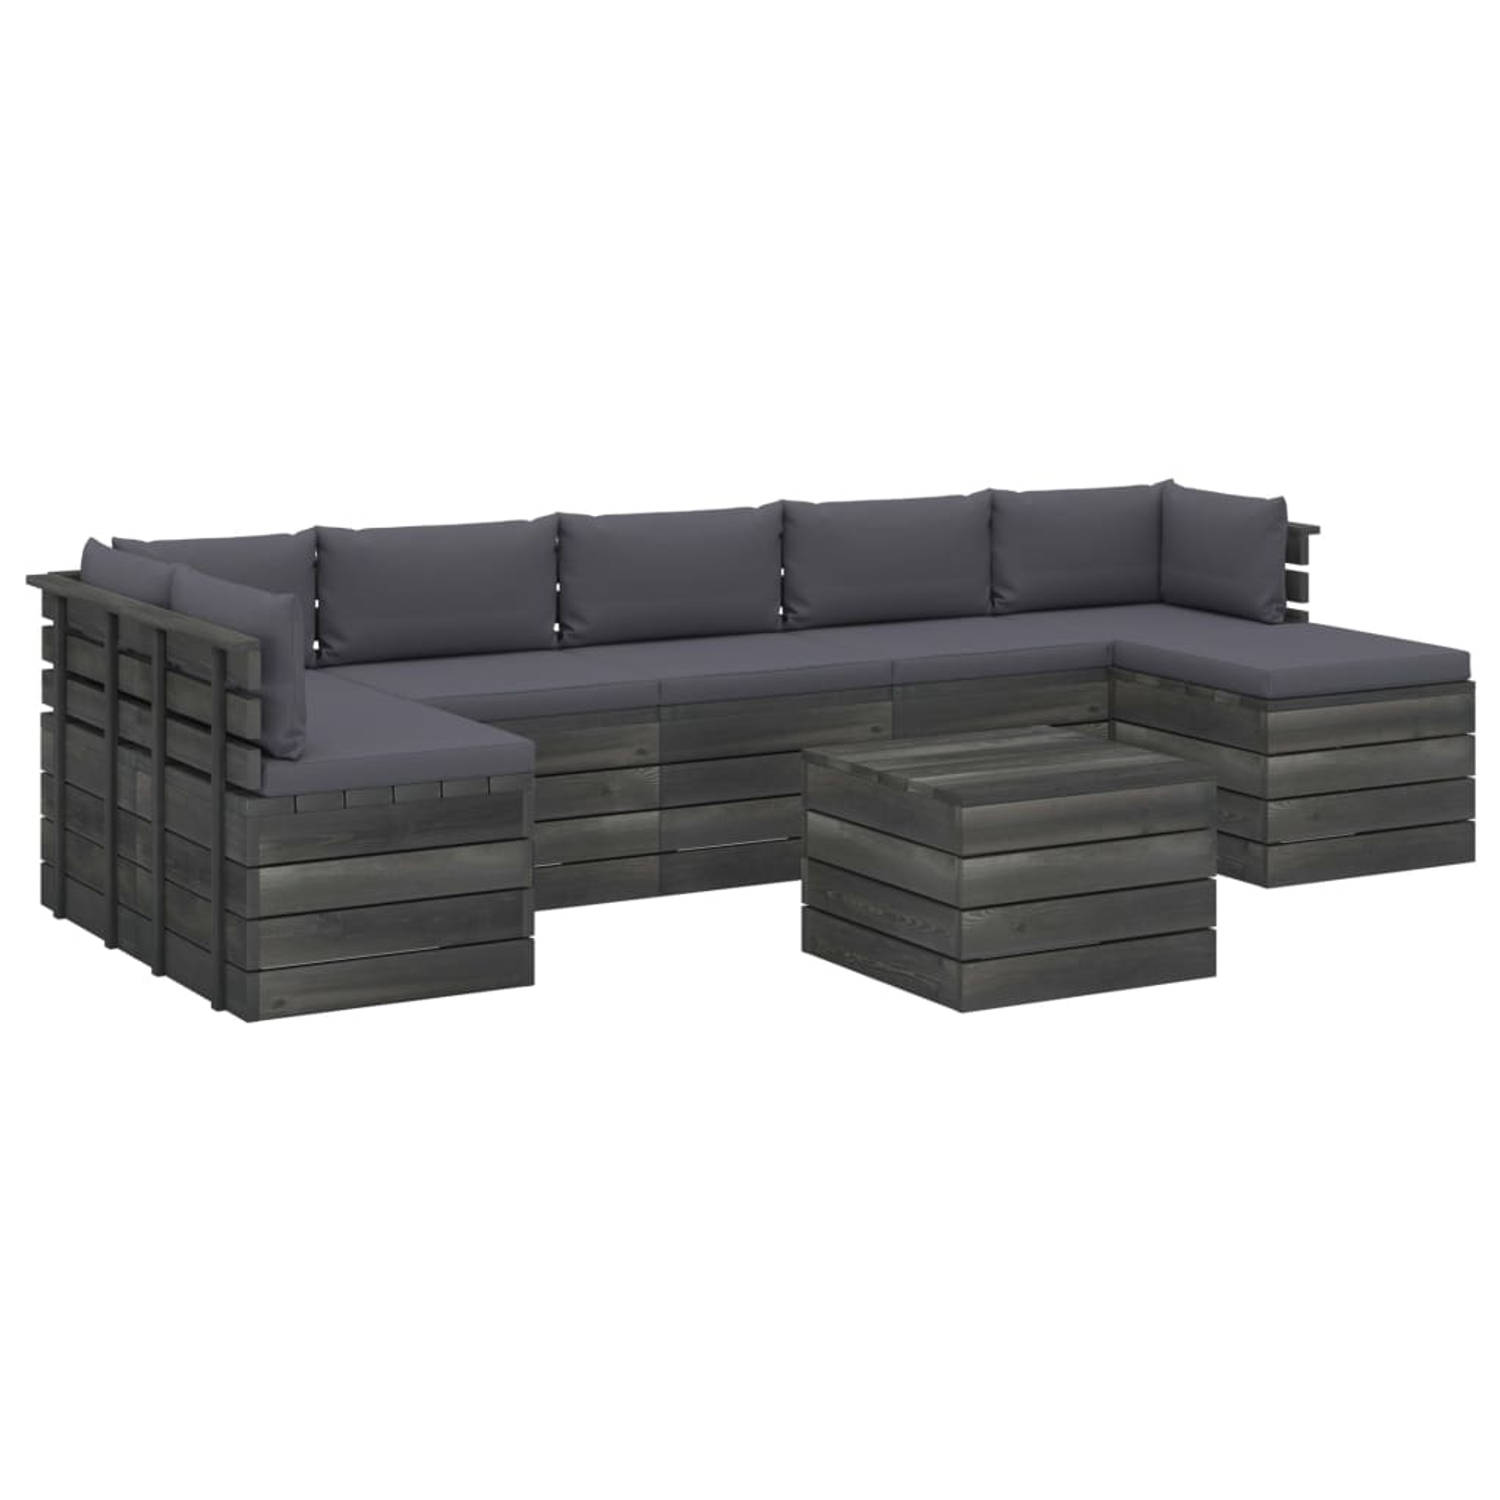 The Living Store Loungeset Pallet - Grenenhout - Antraciet - 60x65x71.5cm